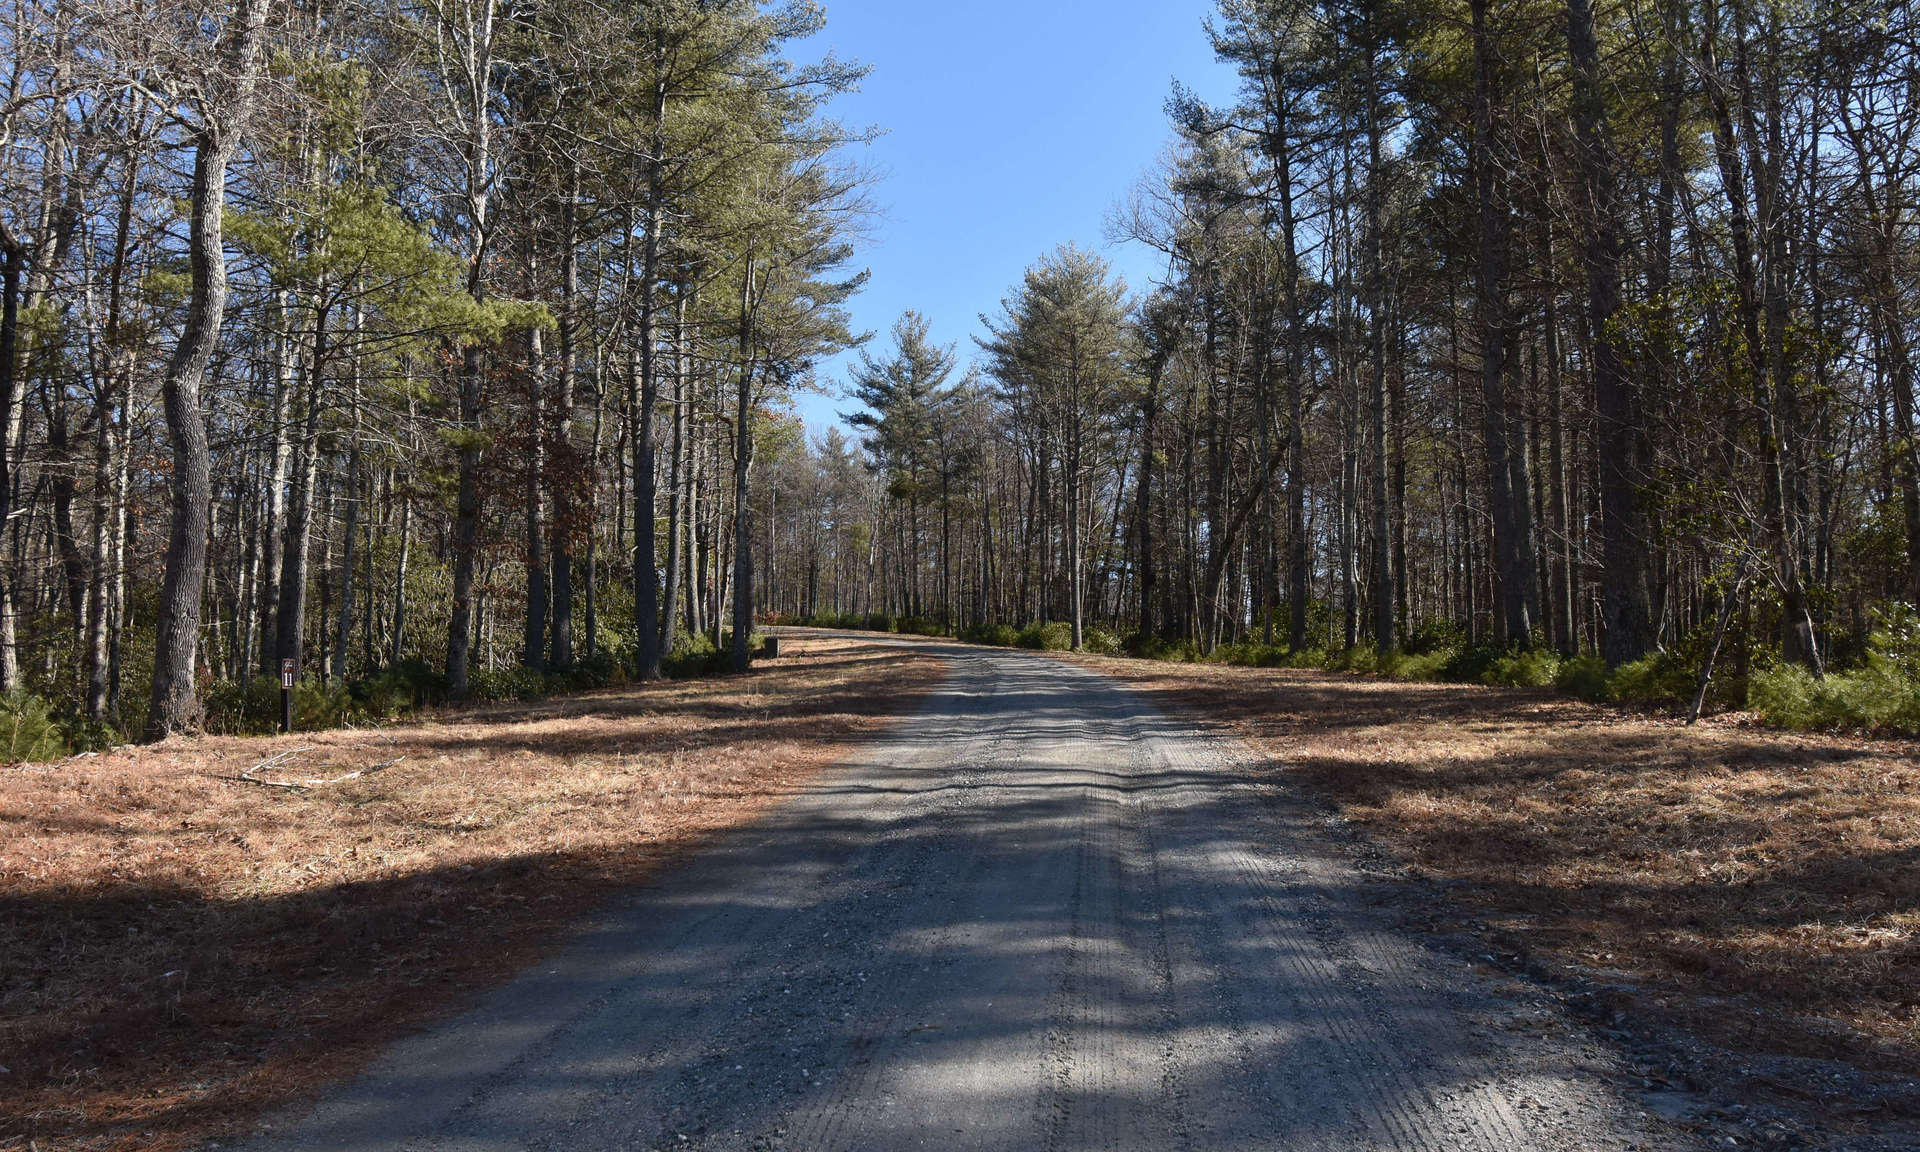 Modulars can be allowed subject to Architectural Review.  Lot 13 is offered at $28,000. This lot can be purchased with lot 6, making a 2.5 acre homesite, for a discounted price.  Come take a look today!  Call or email for details on listing L236.